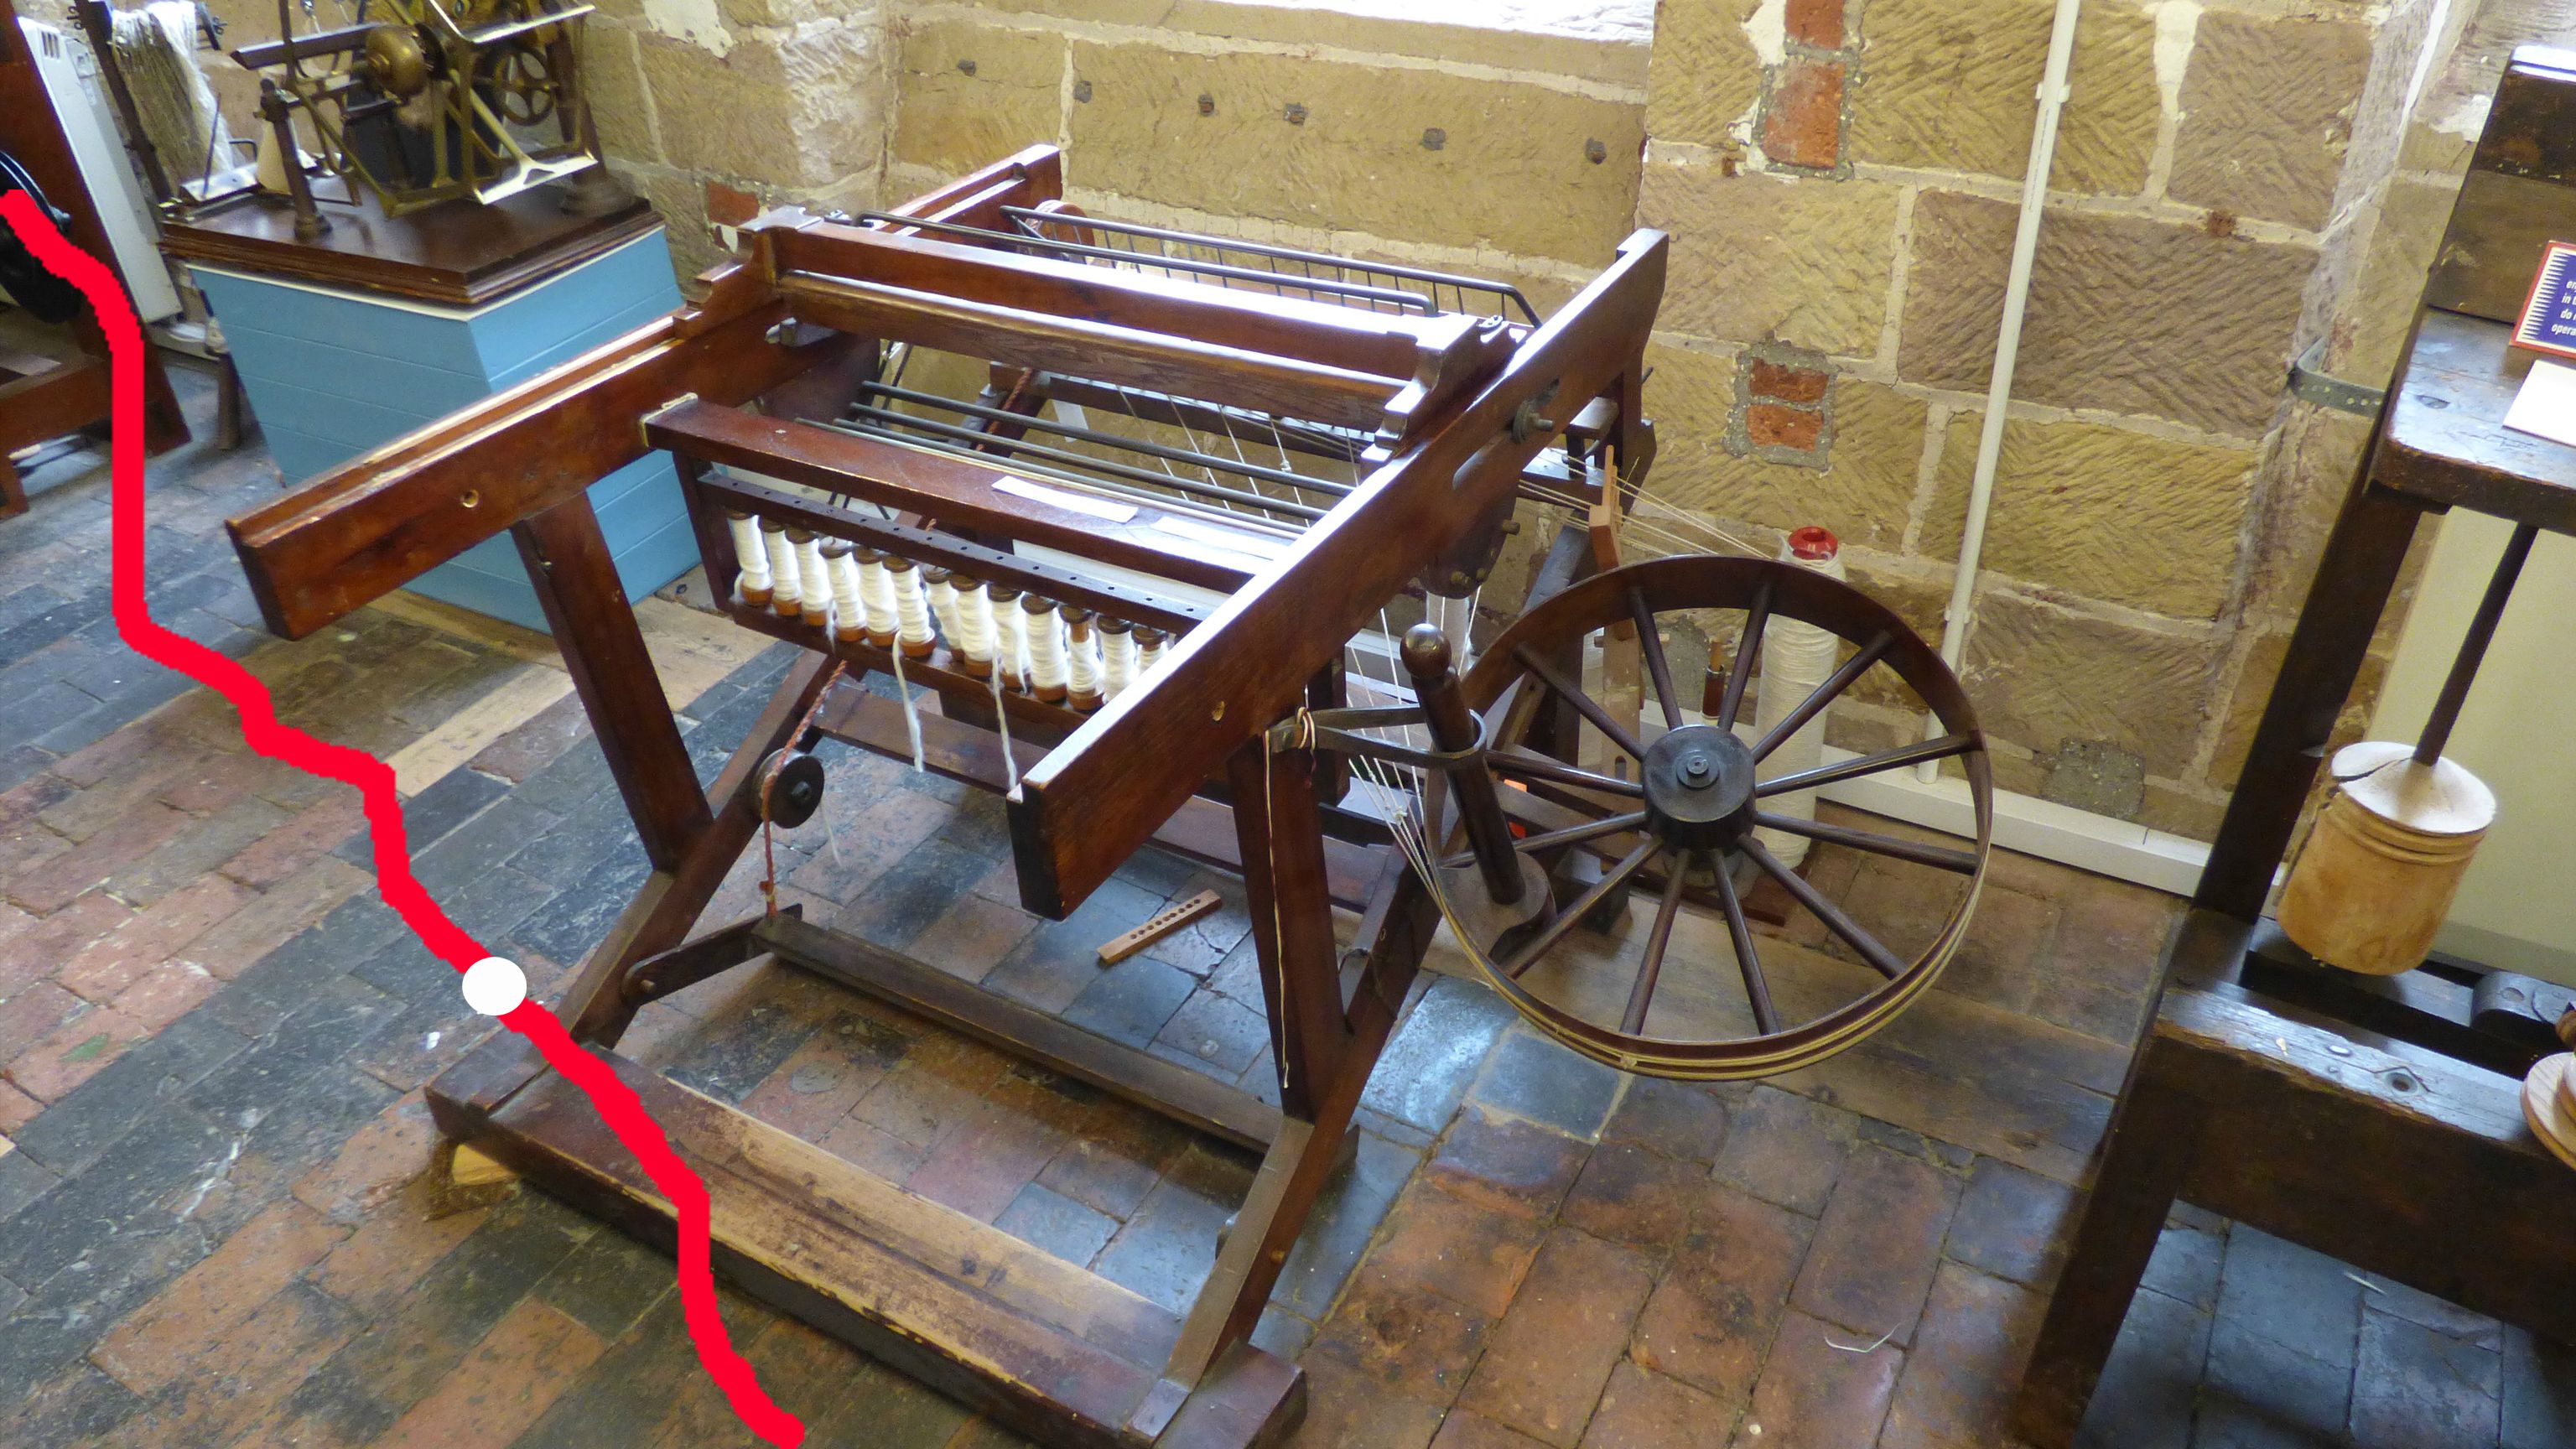 The first machine to spin the cotton.